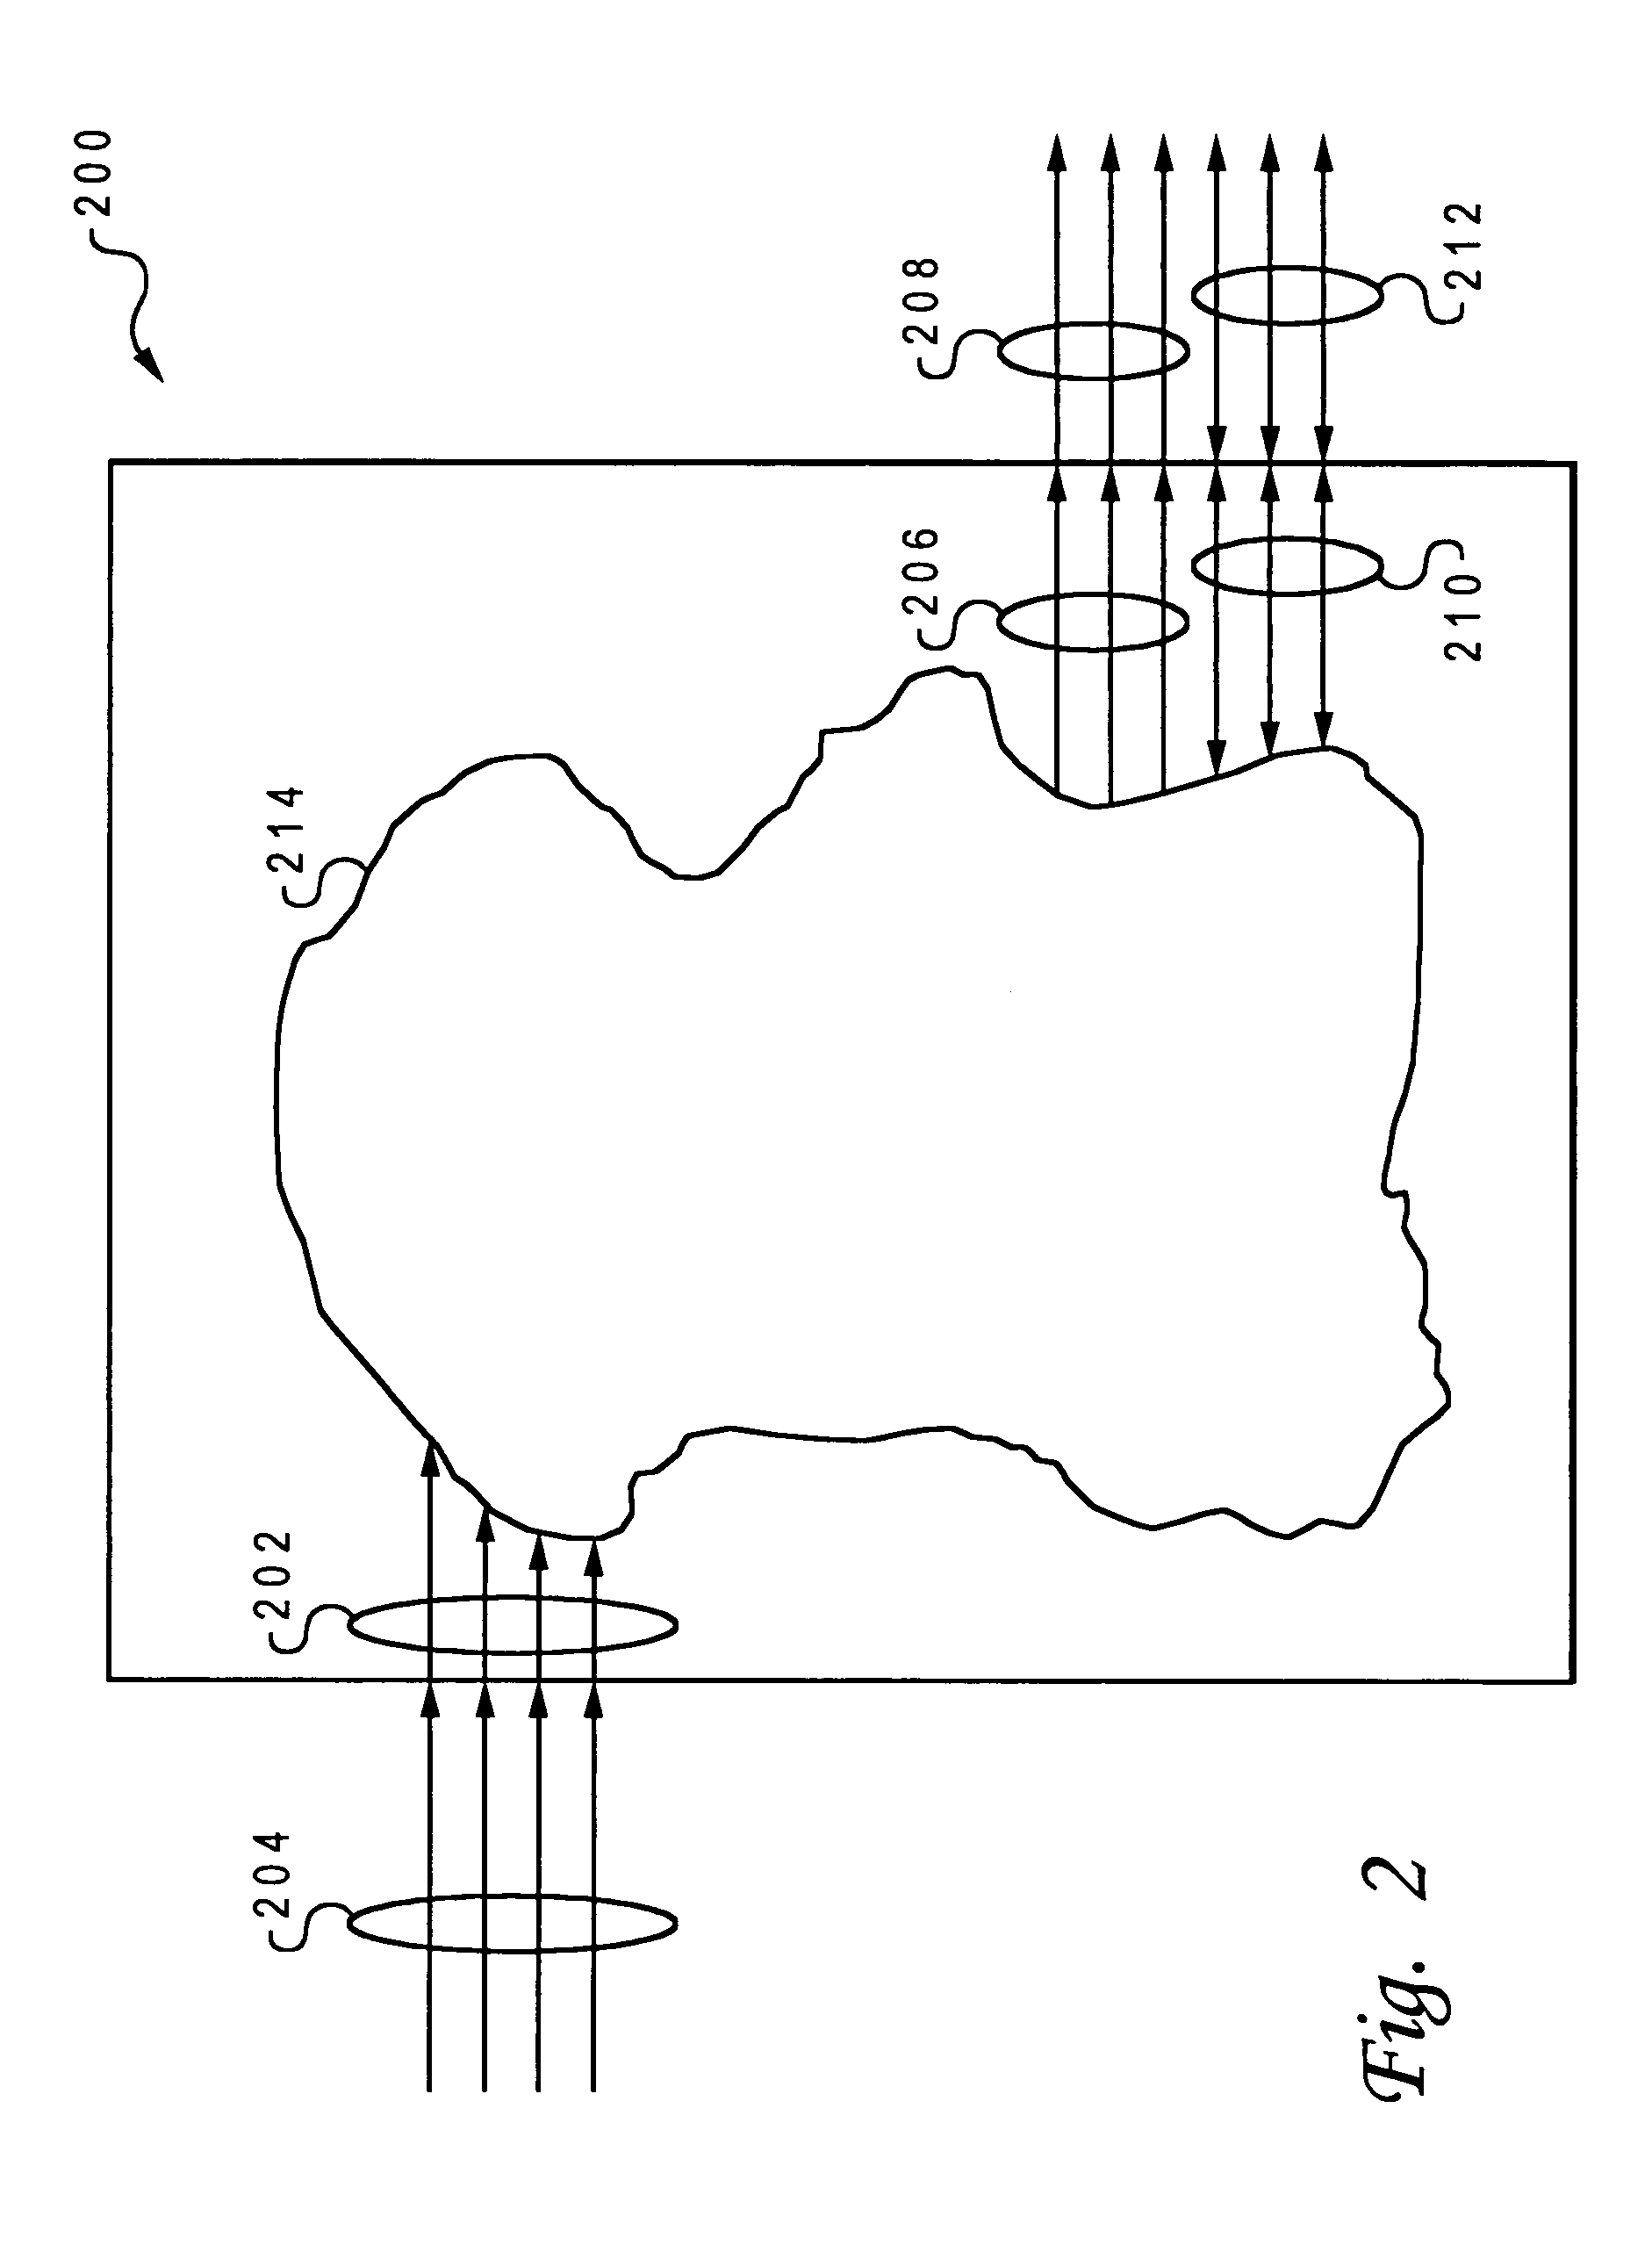 Method, system and program product providing a configuration specification language having clone latch support